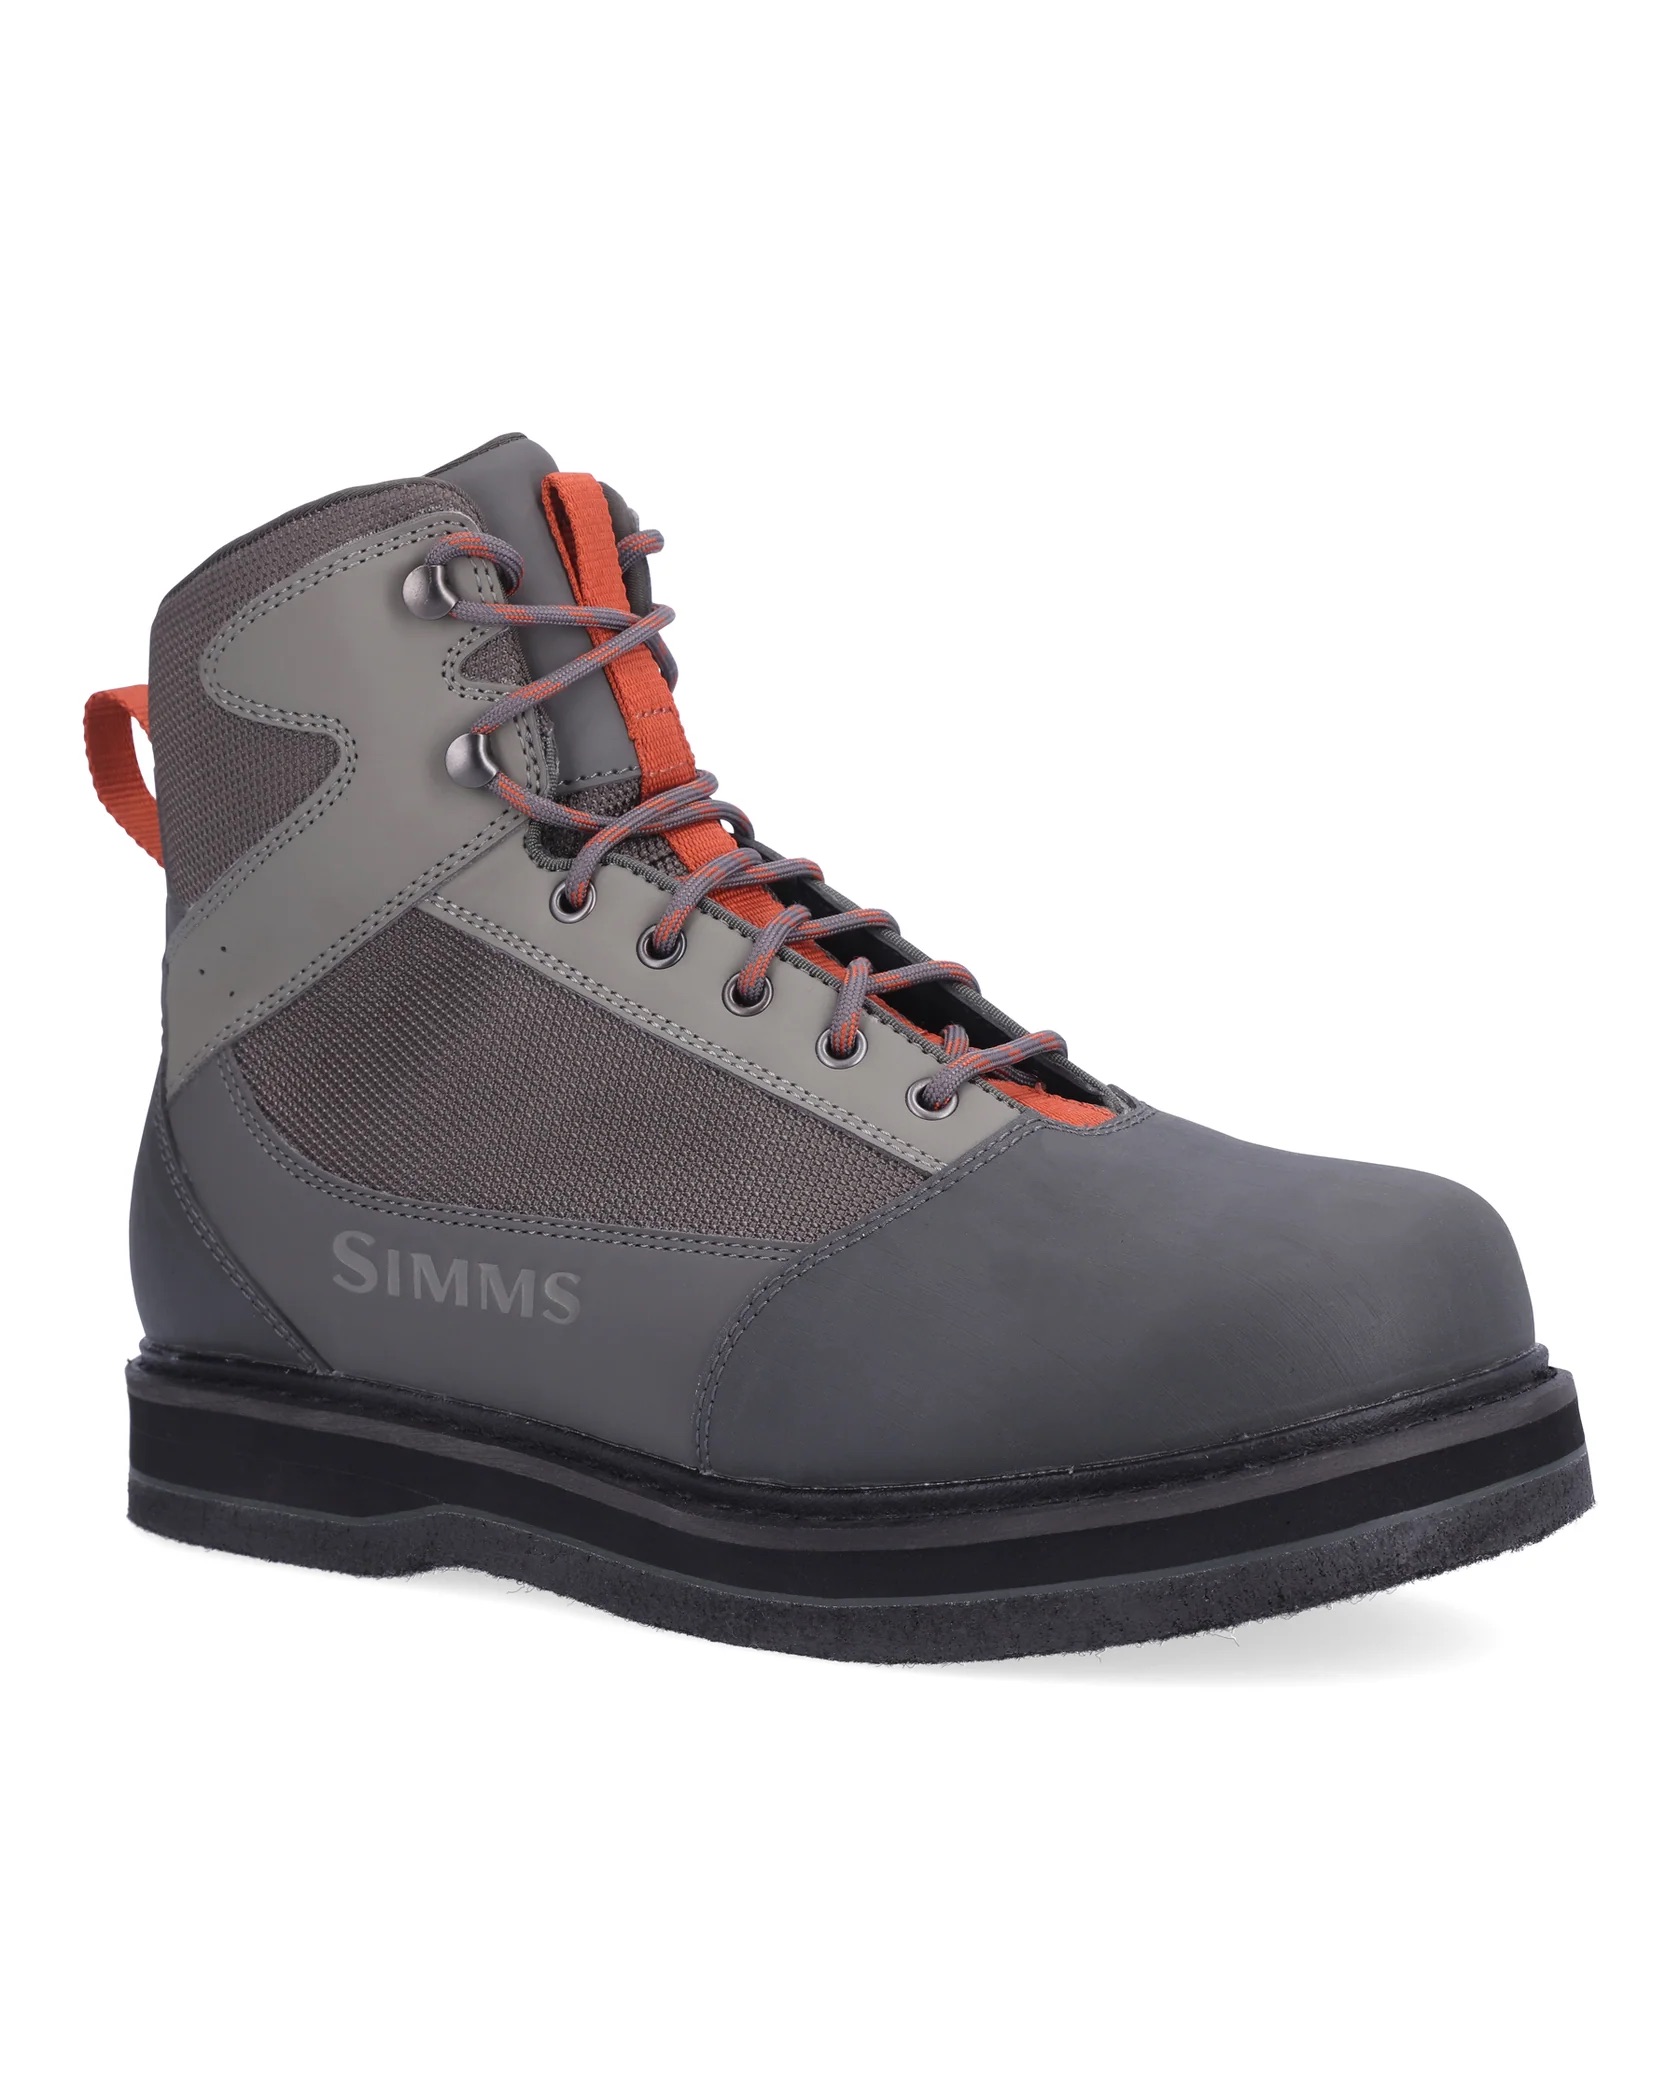 Simms Tributary Wading Boot - Felt - Size 4